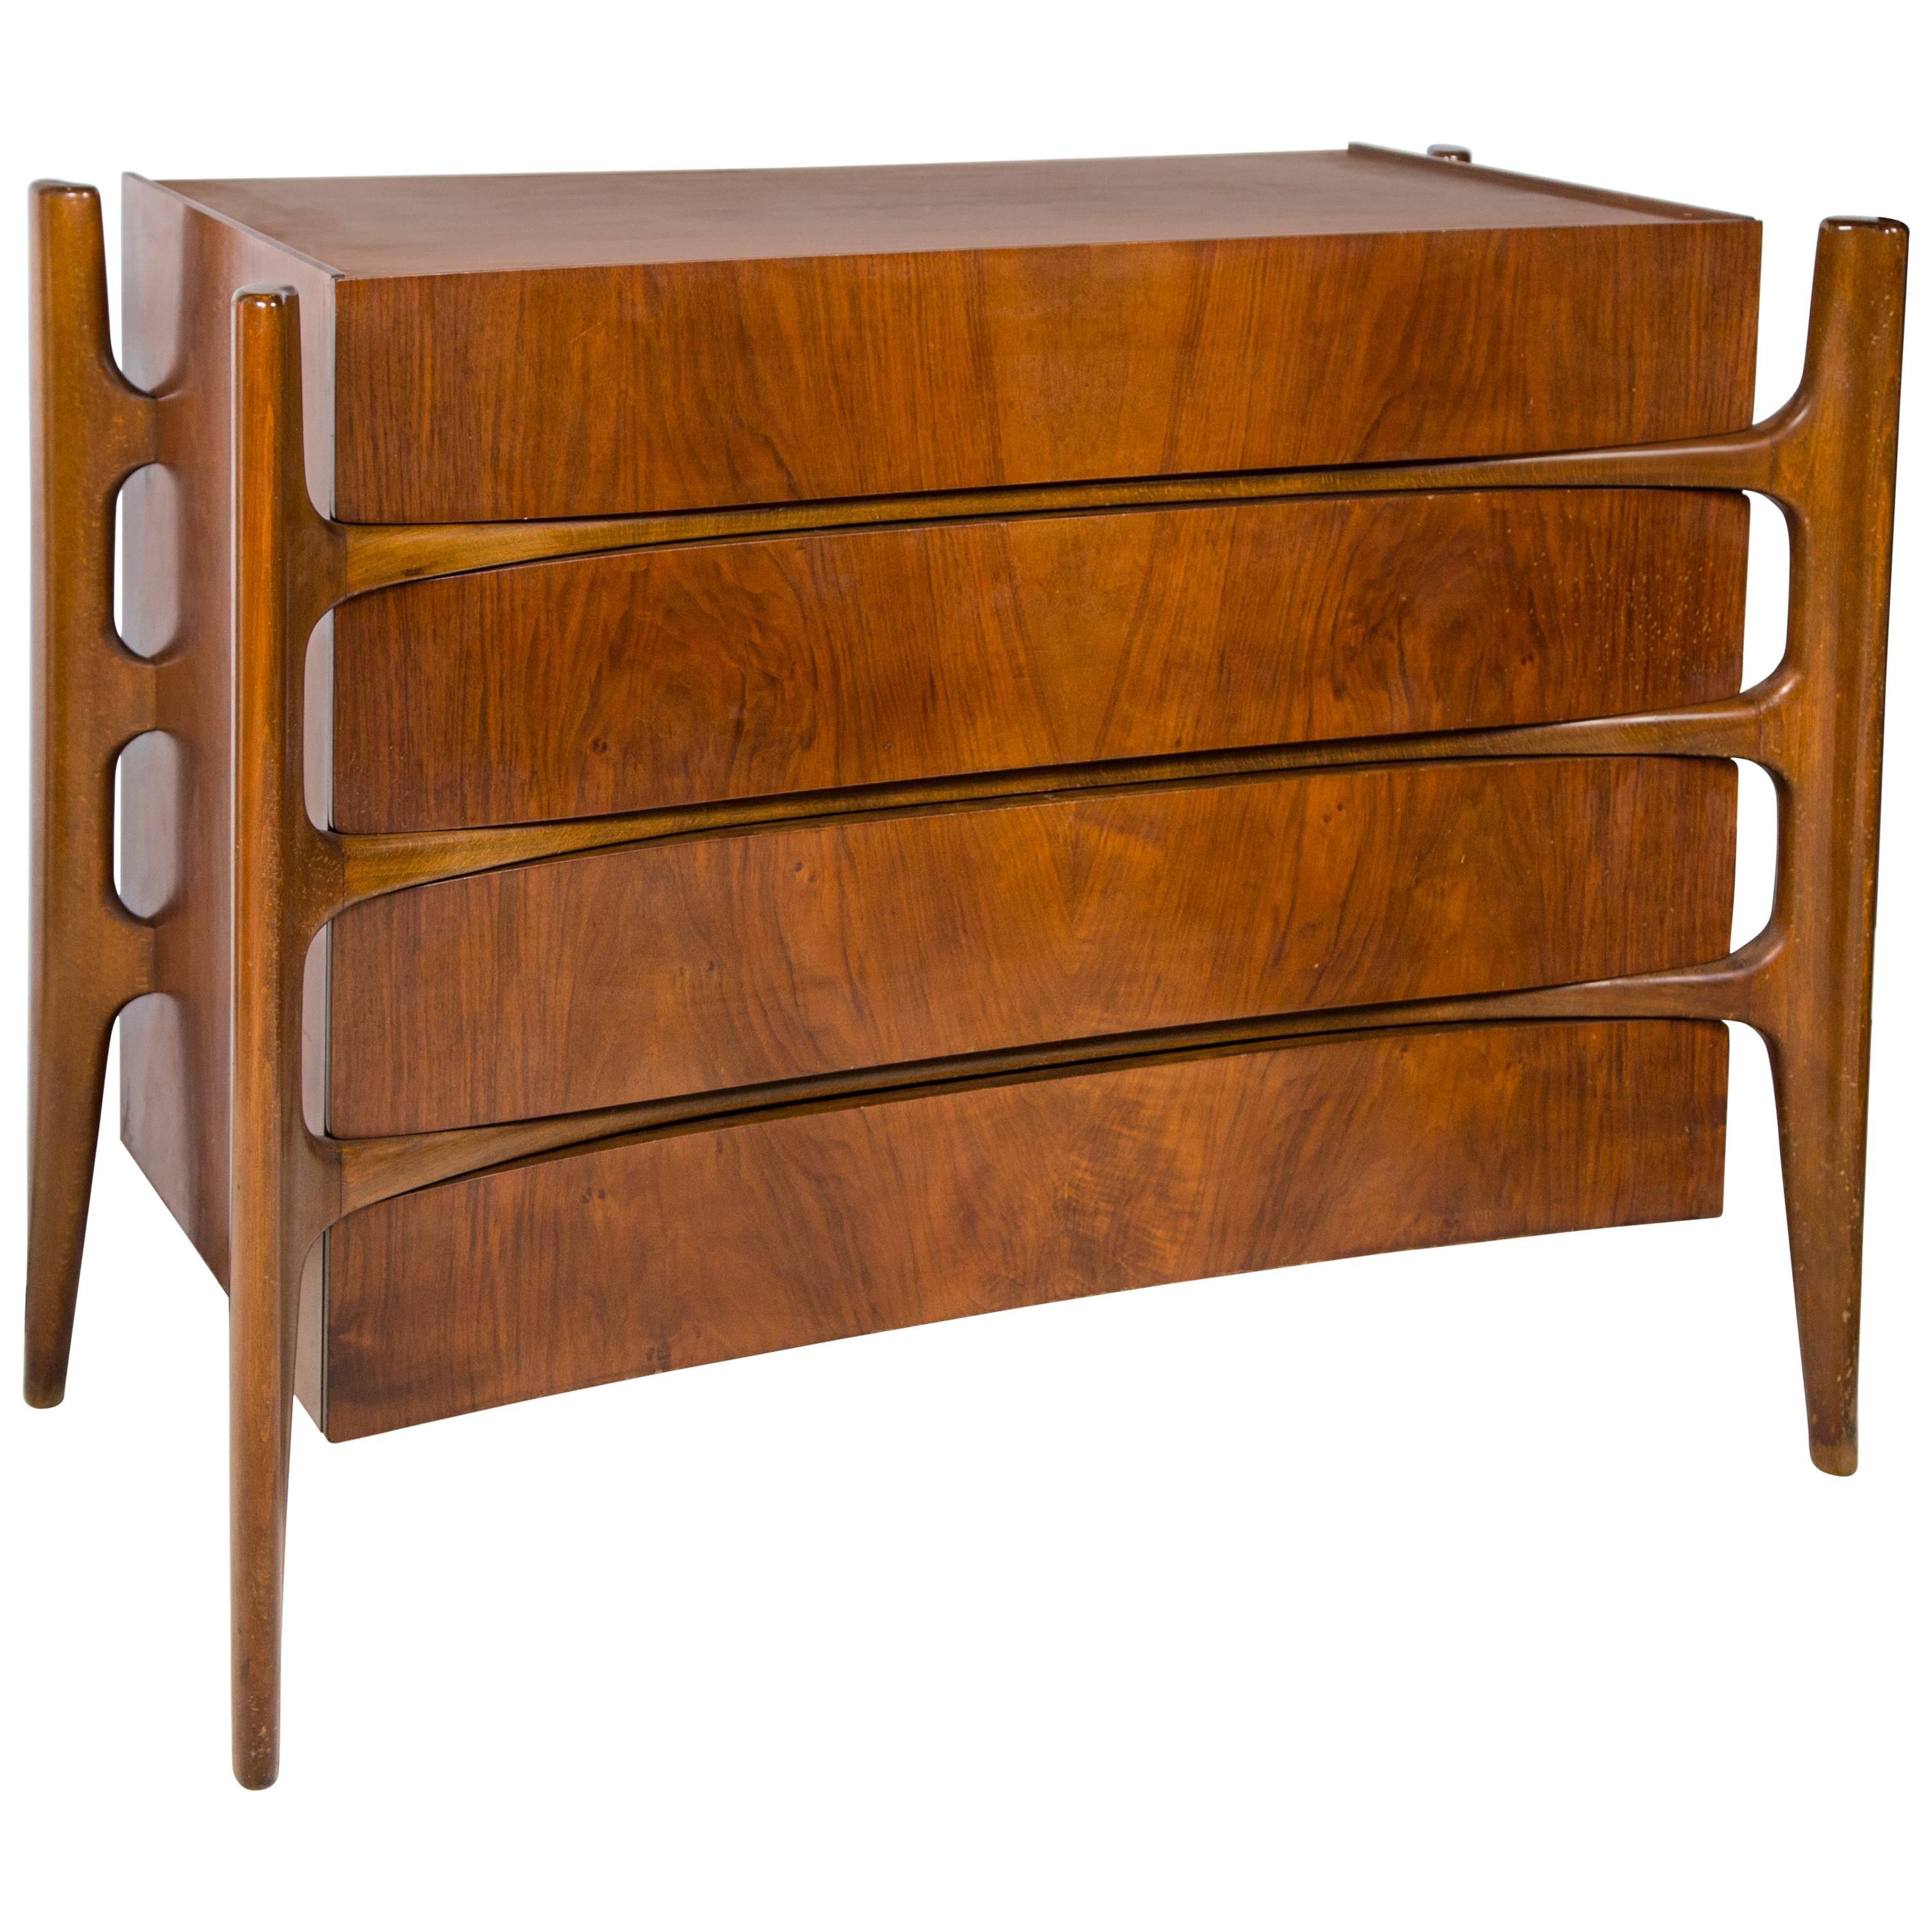 William Hinn for Urban Furniture Company Chest of Drawers